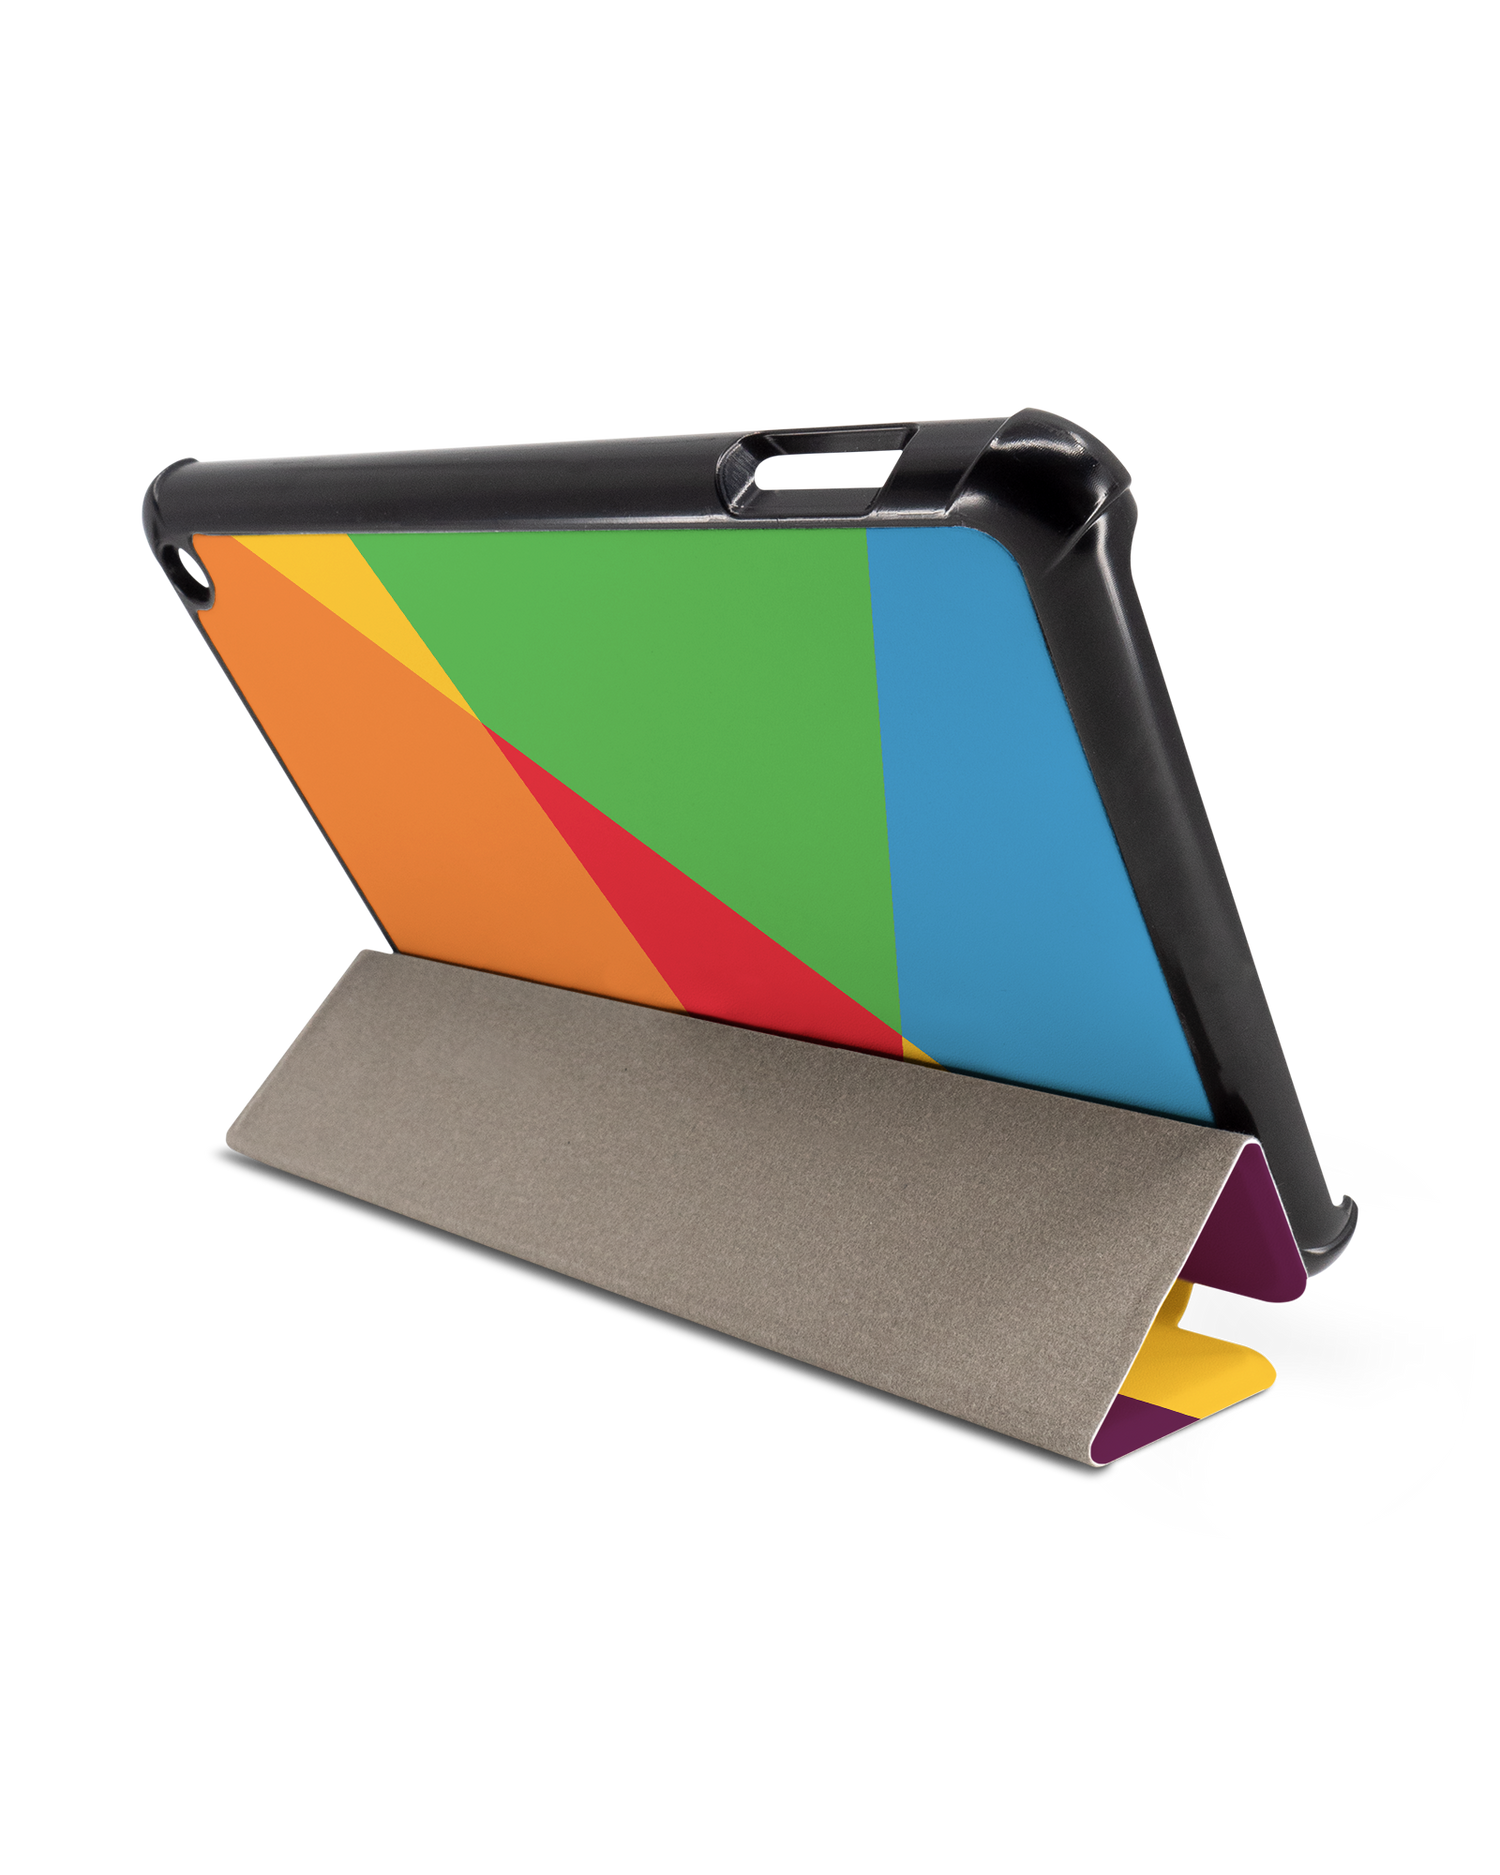 Pringles Abstract Tablet Smart Case for Amazon Fire 7 (2022): Used as Stand